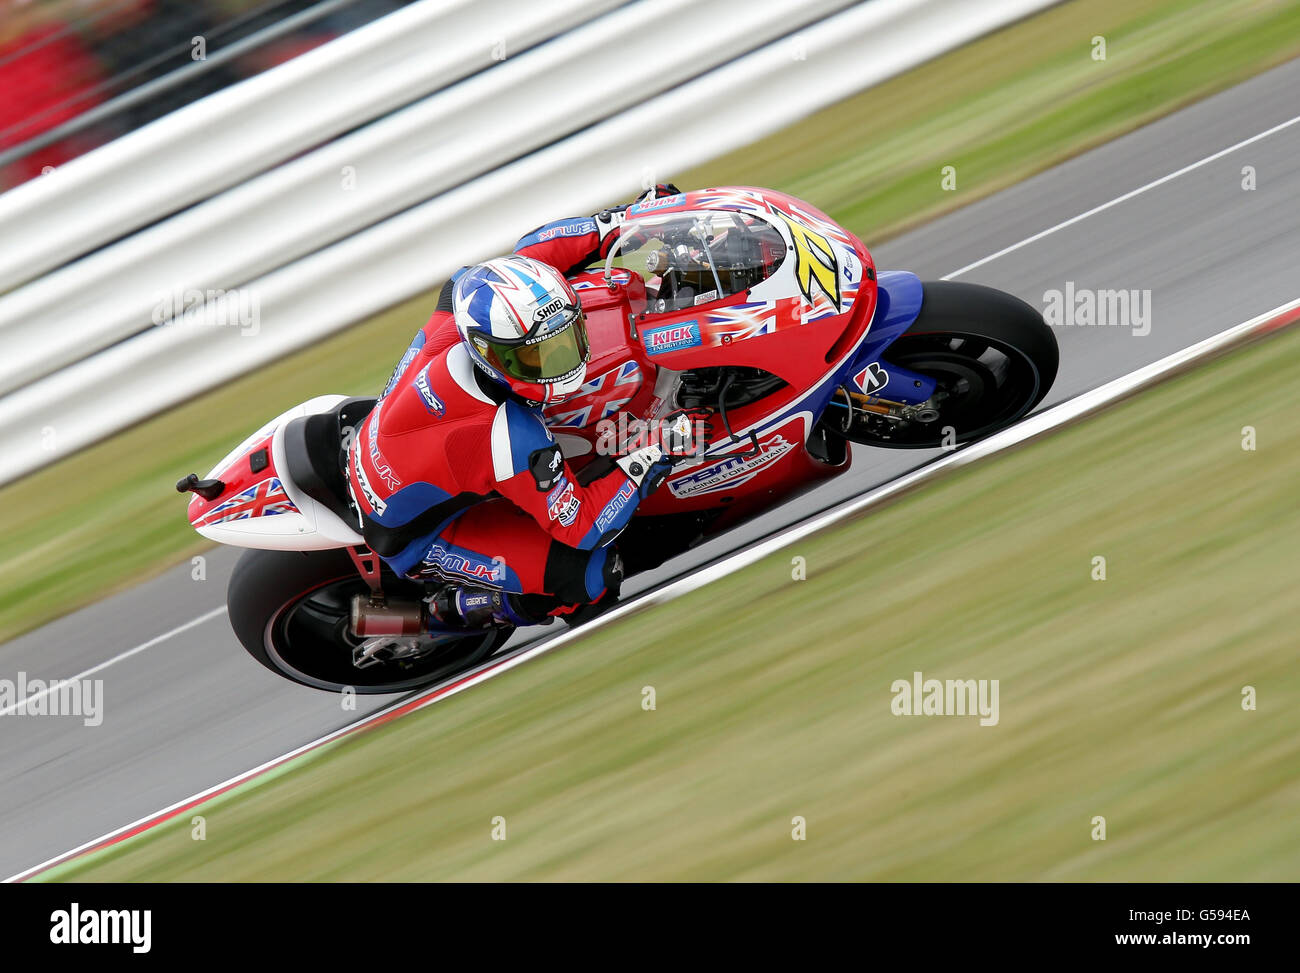 Motorcycling - 2012 Hertz British Grand Prix - Day Two - Qualifying - Moto GP - Silverstone. Great Britain's James Ellison during practice for the British round of Moto GP at Silverstone Circuit, Northamptonshire. Stock Photo